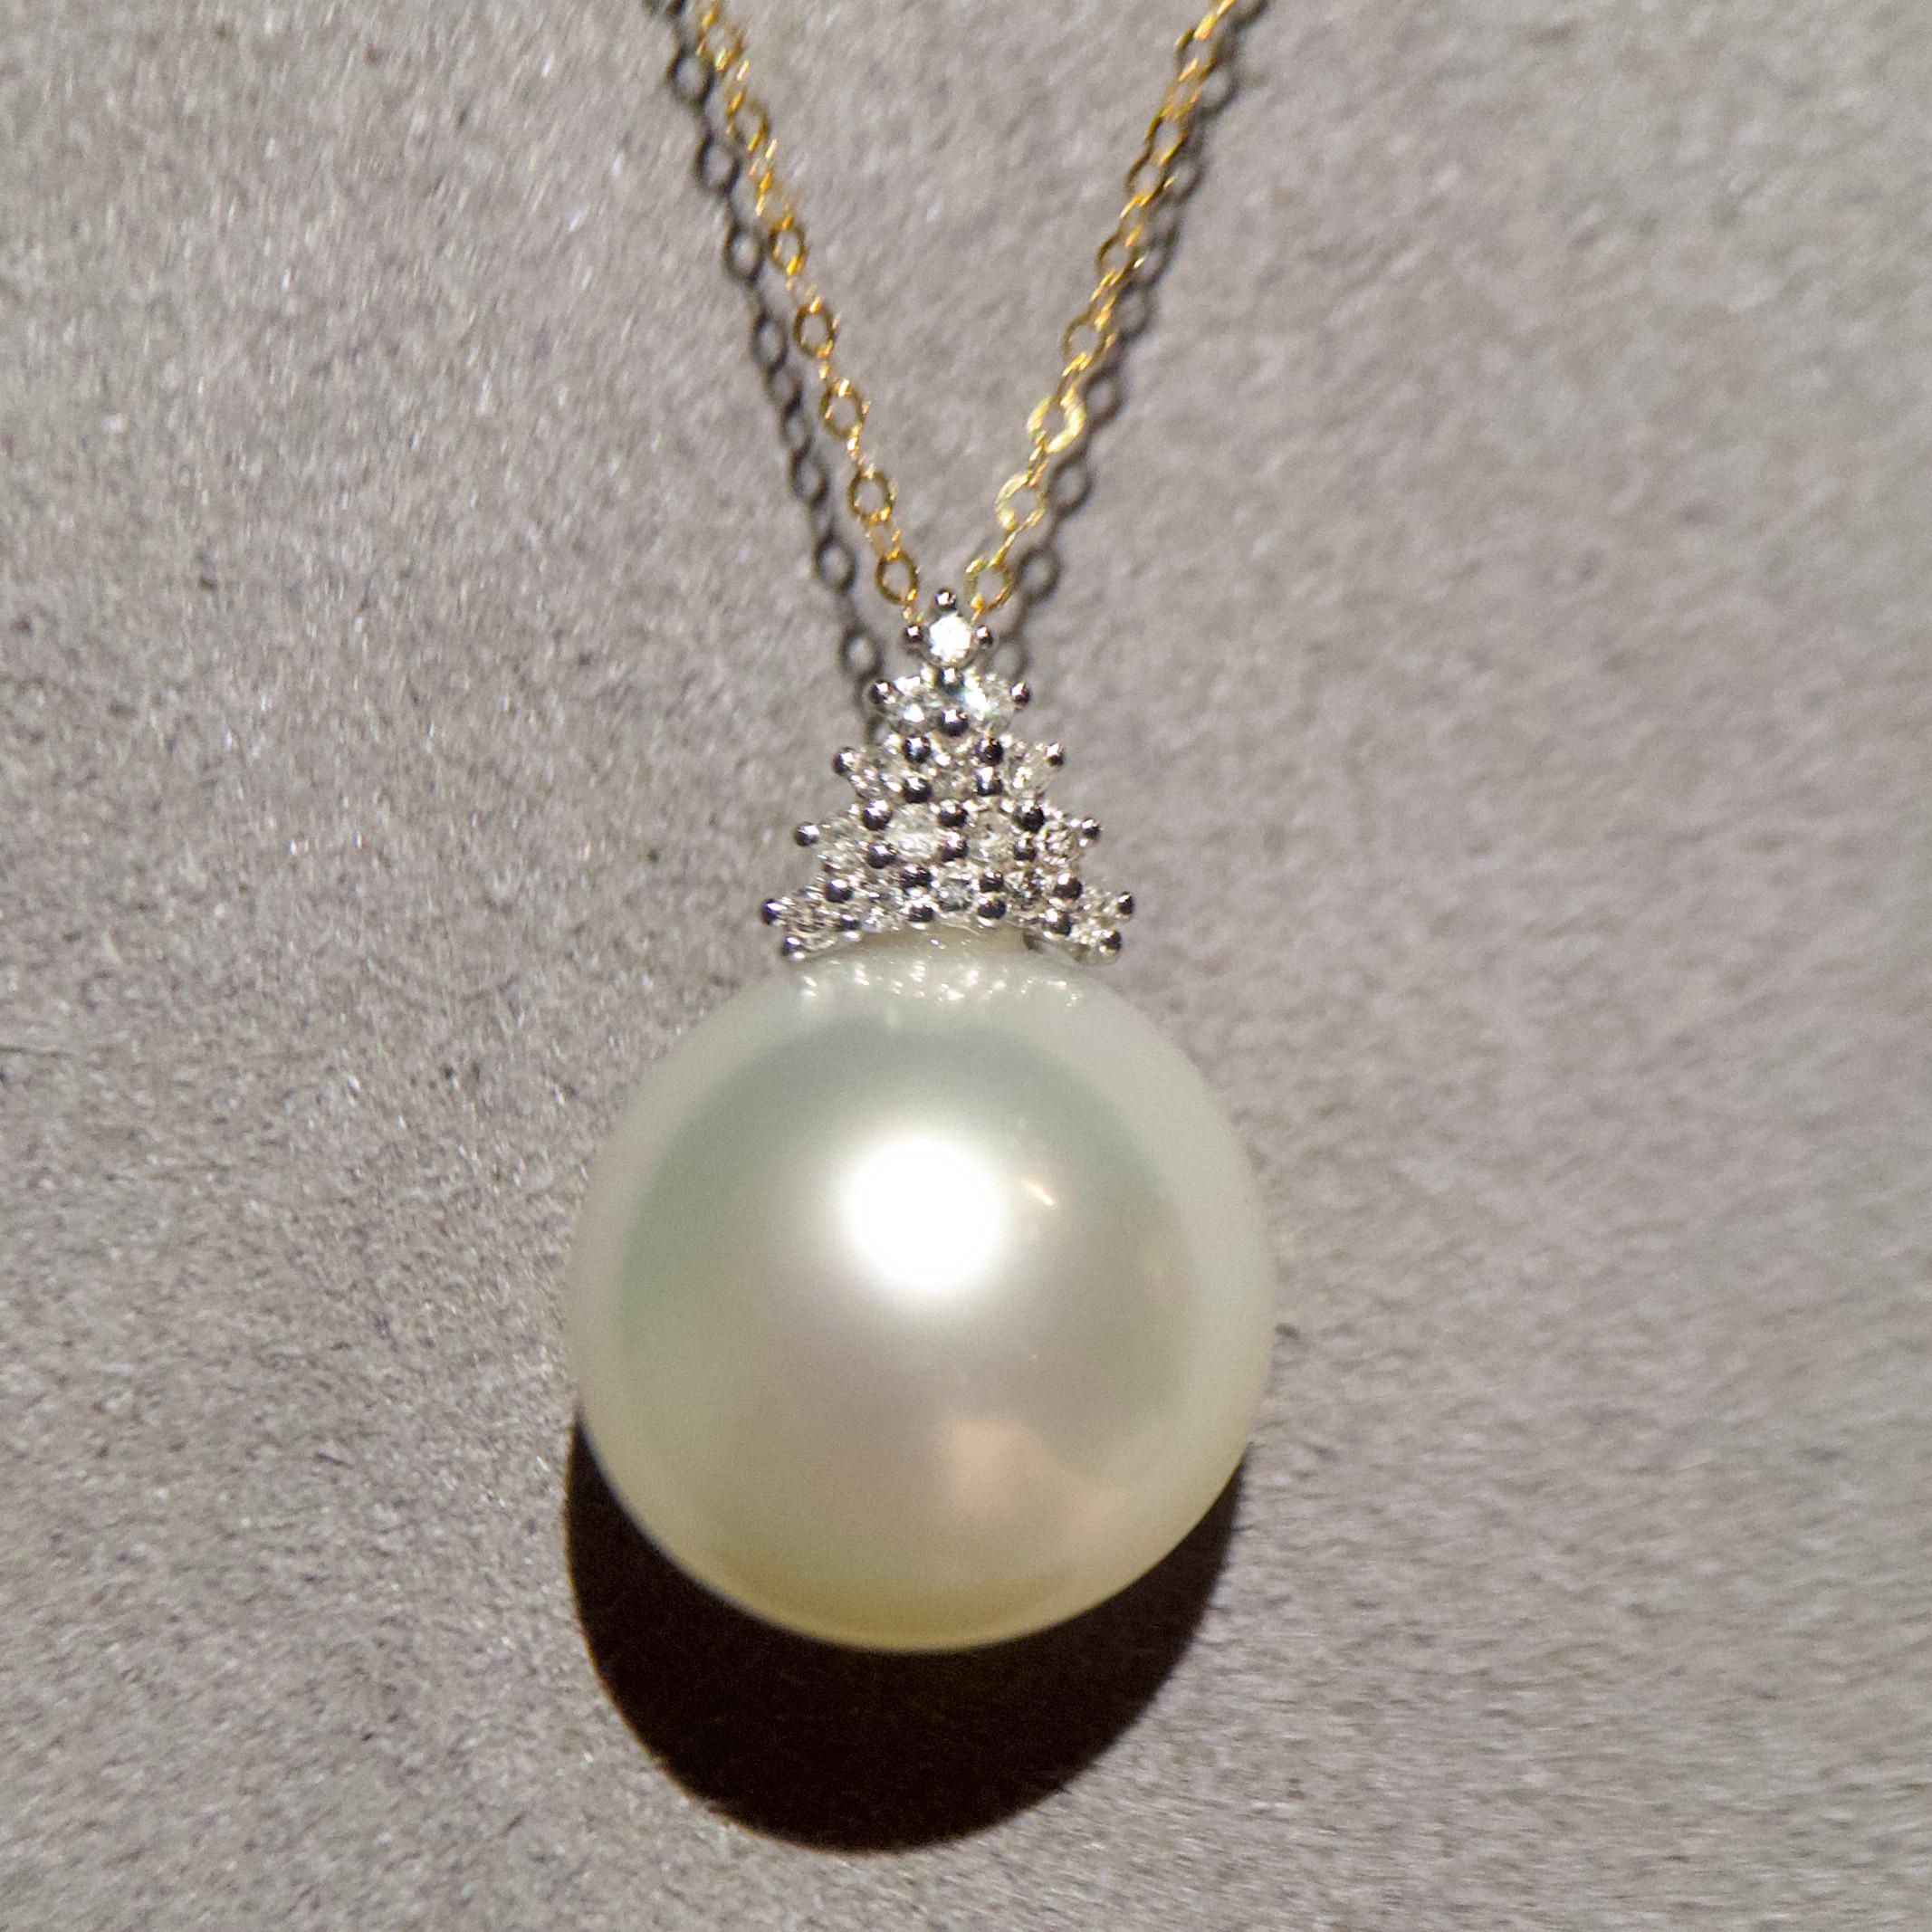 The South Sea Pearl is suspended under a triangle diamond pave bale, it is a very simple yet beautiful design. You only need a few diamonds in the bale to achieved a sparkling effect that we want in a jewellery. This pendant is definitely a bargain